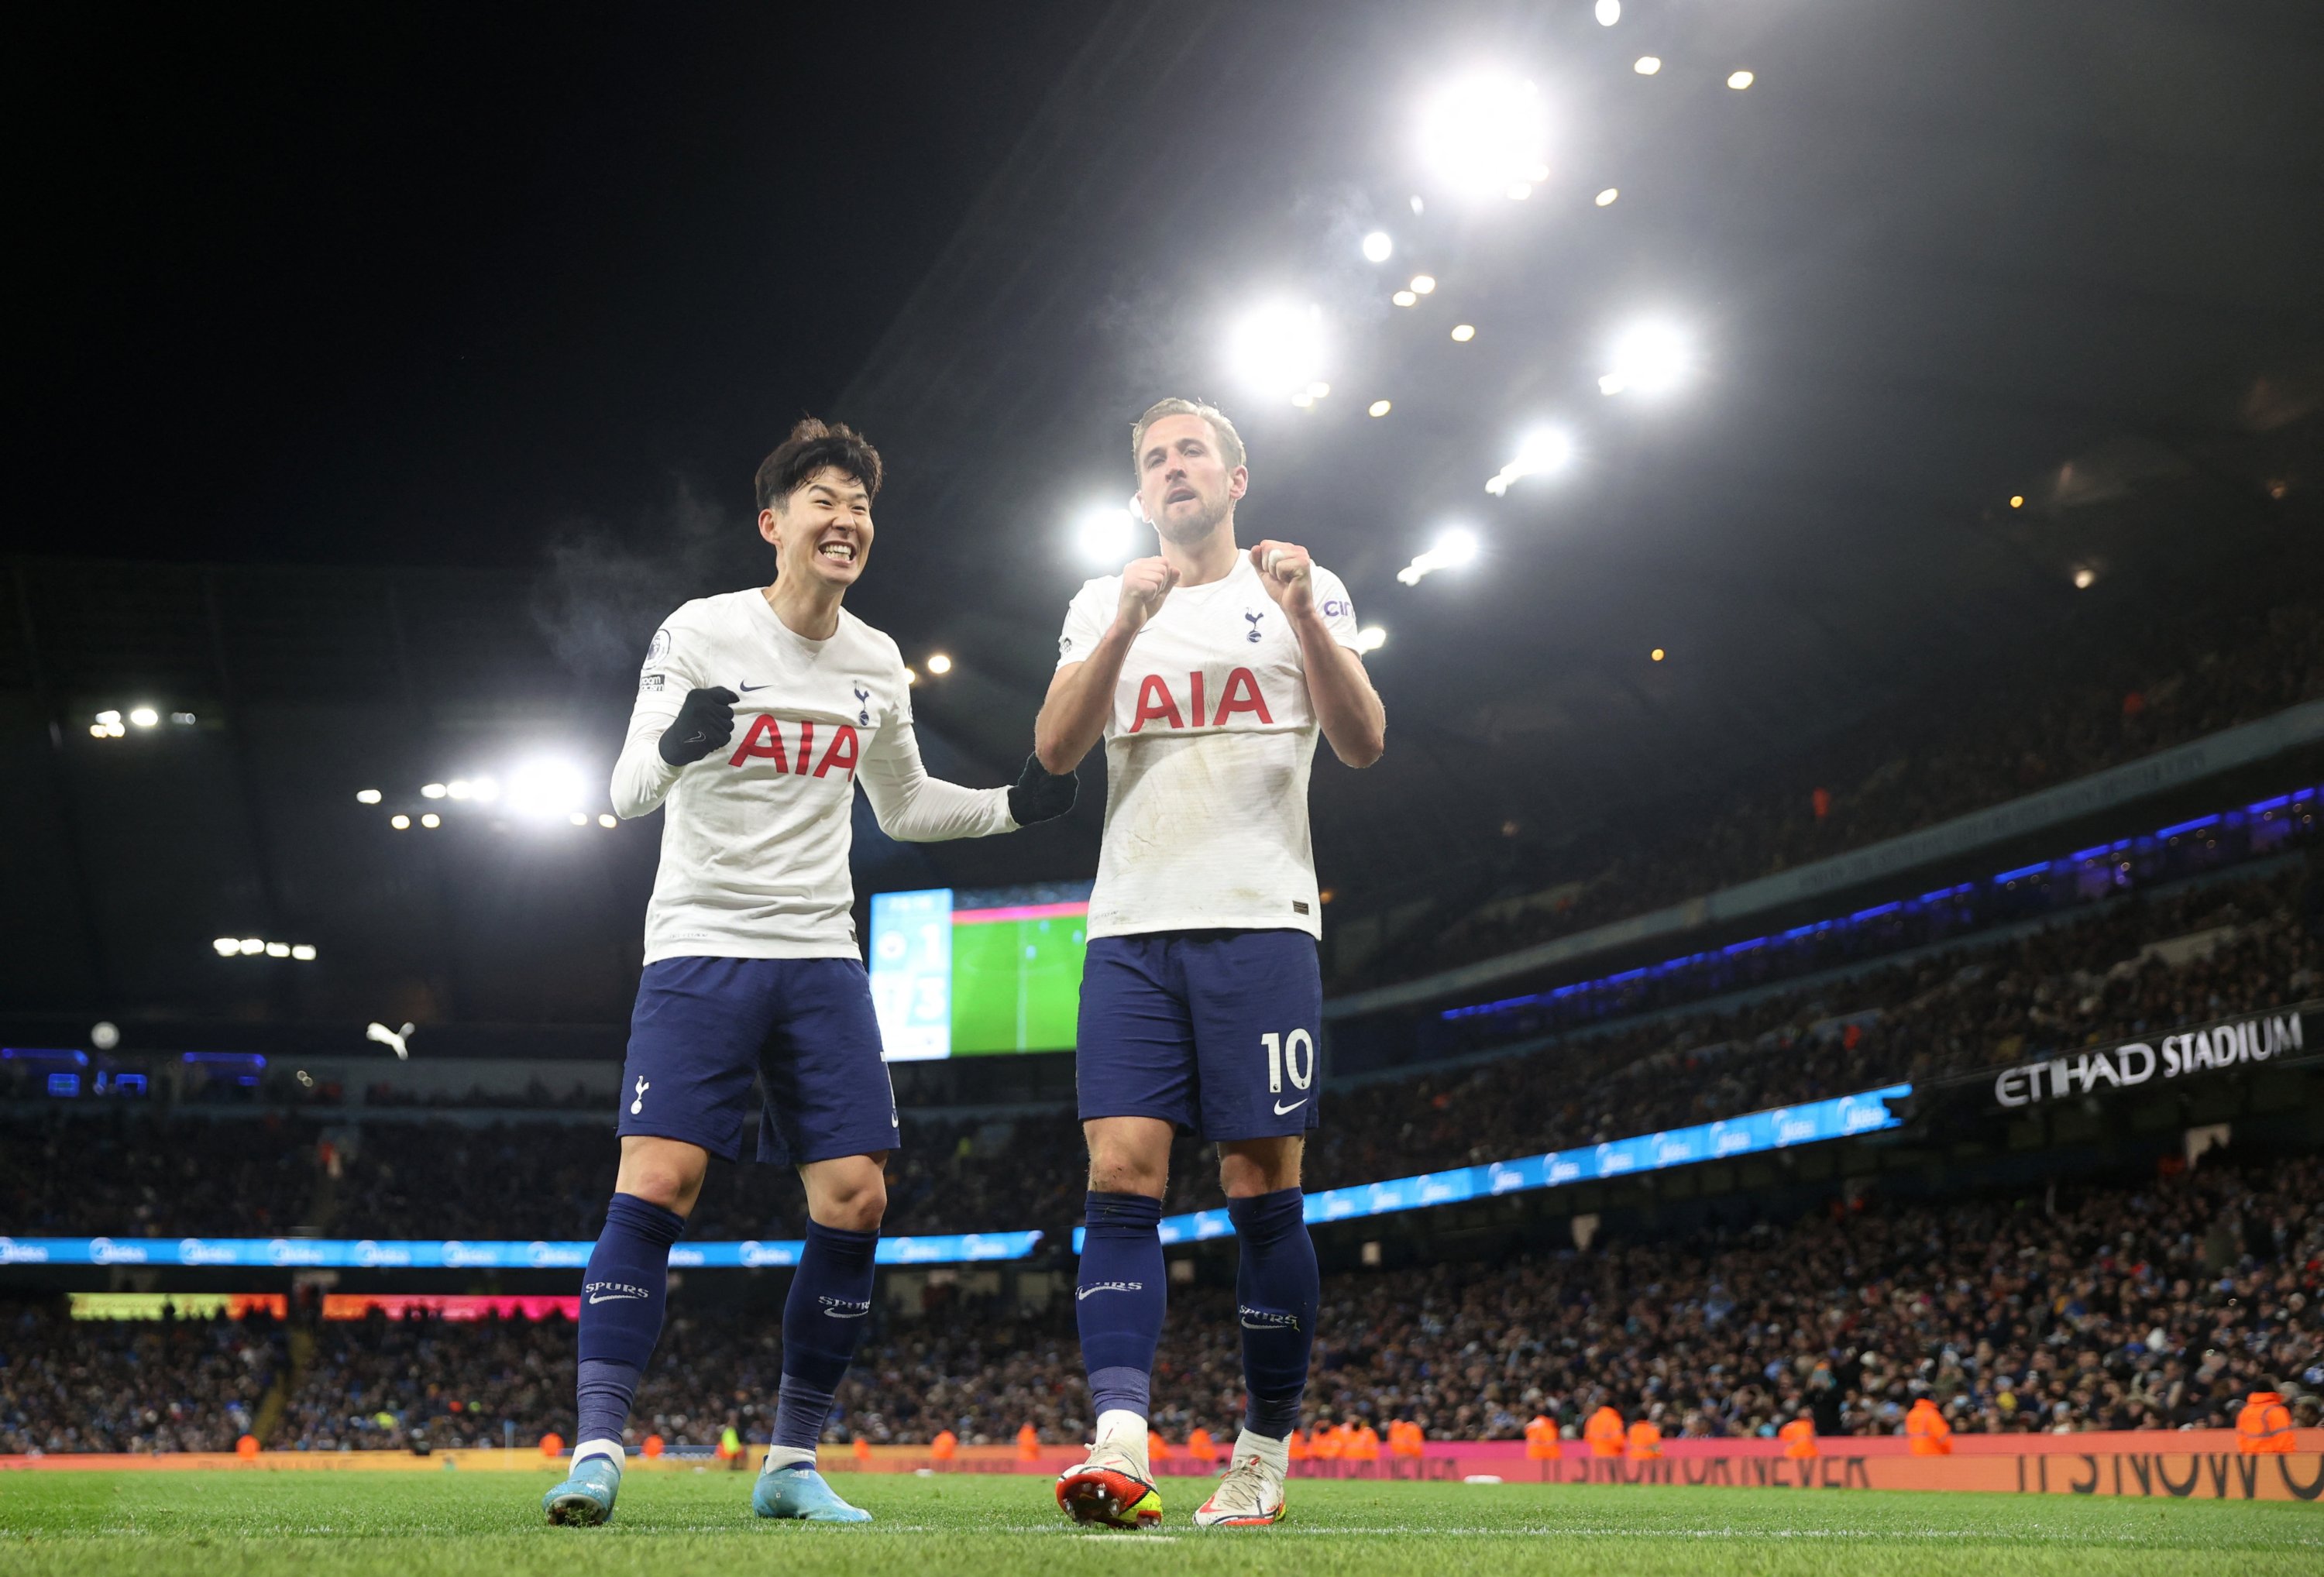 Tottenham Hotspur's Harry Kane (R) celebrates scoring their third goal with teammate Son Heung-min before it is ruled out following a VAR review during the English Premier League match at Etihad Stadium, Manchester, U.K., Feb. 19, 2022. (Action Images via Reuters/Carl Recine)(Action Images via Reuters/Carl Recine)